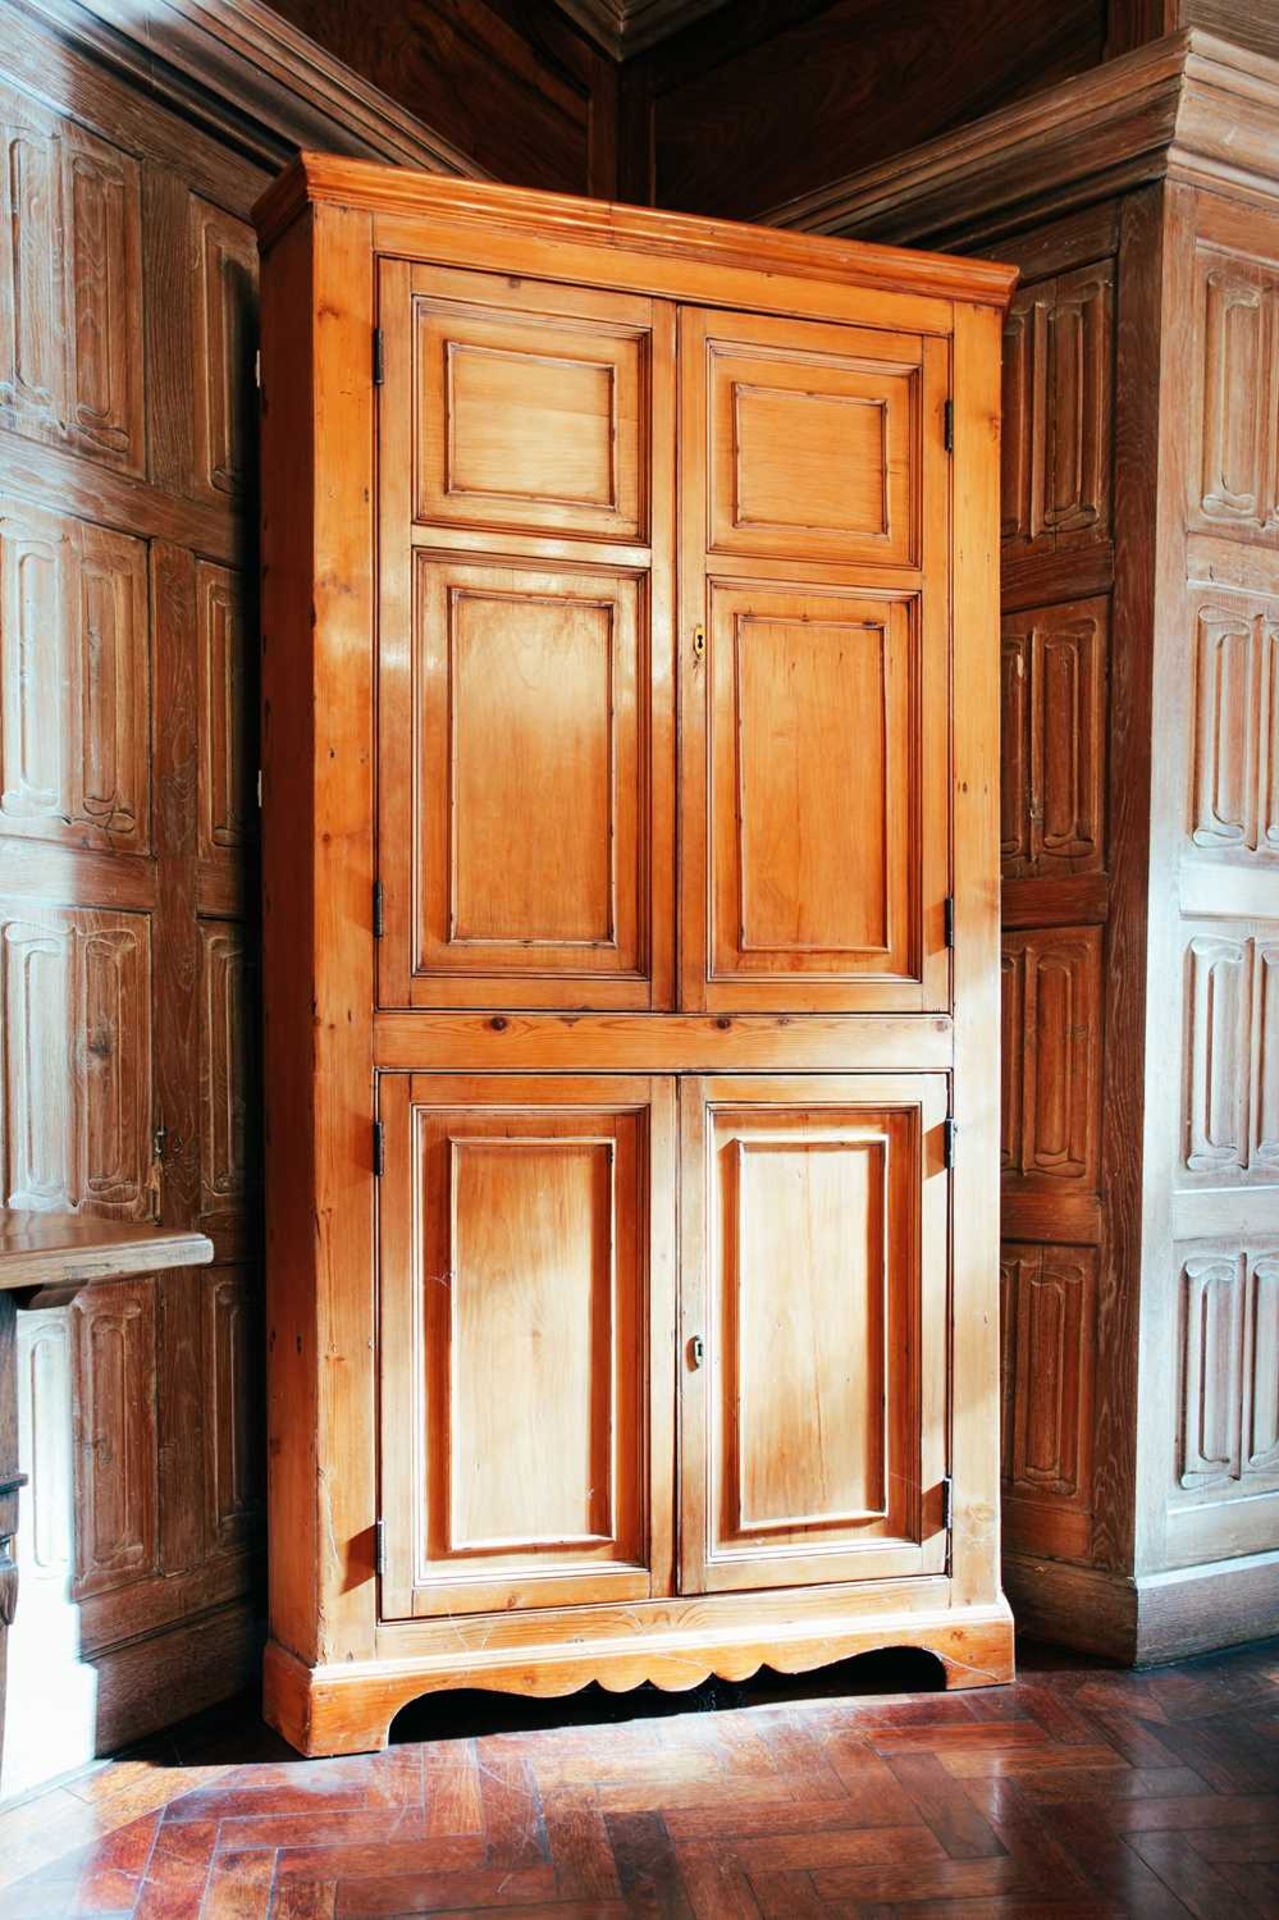 An early 19th century pine corner cupboard, with pair of panelled doors above another similar